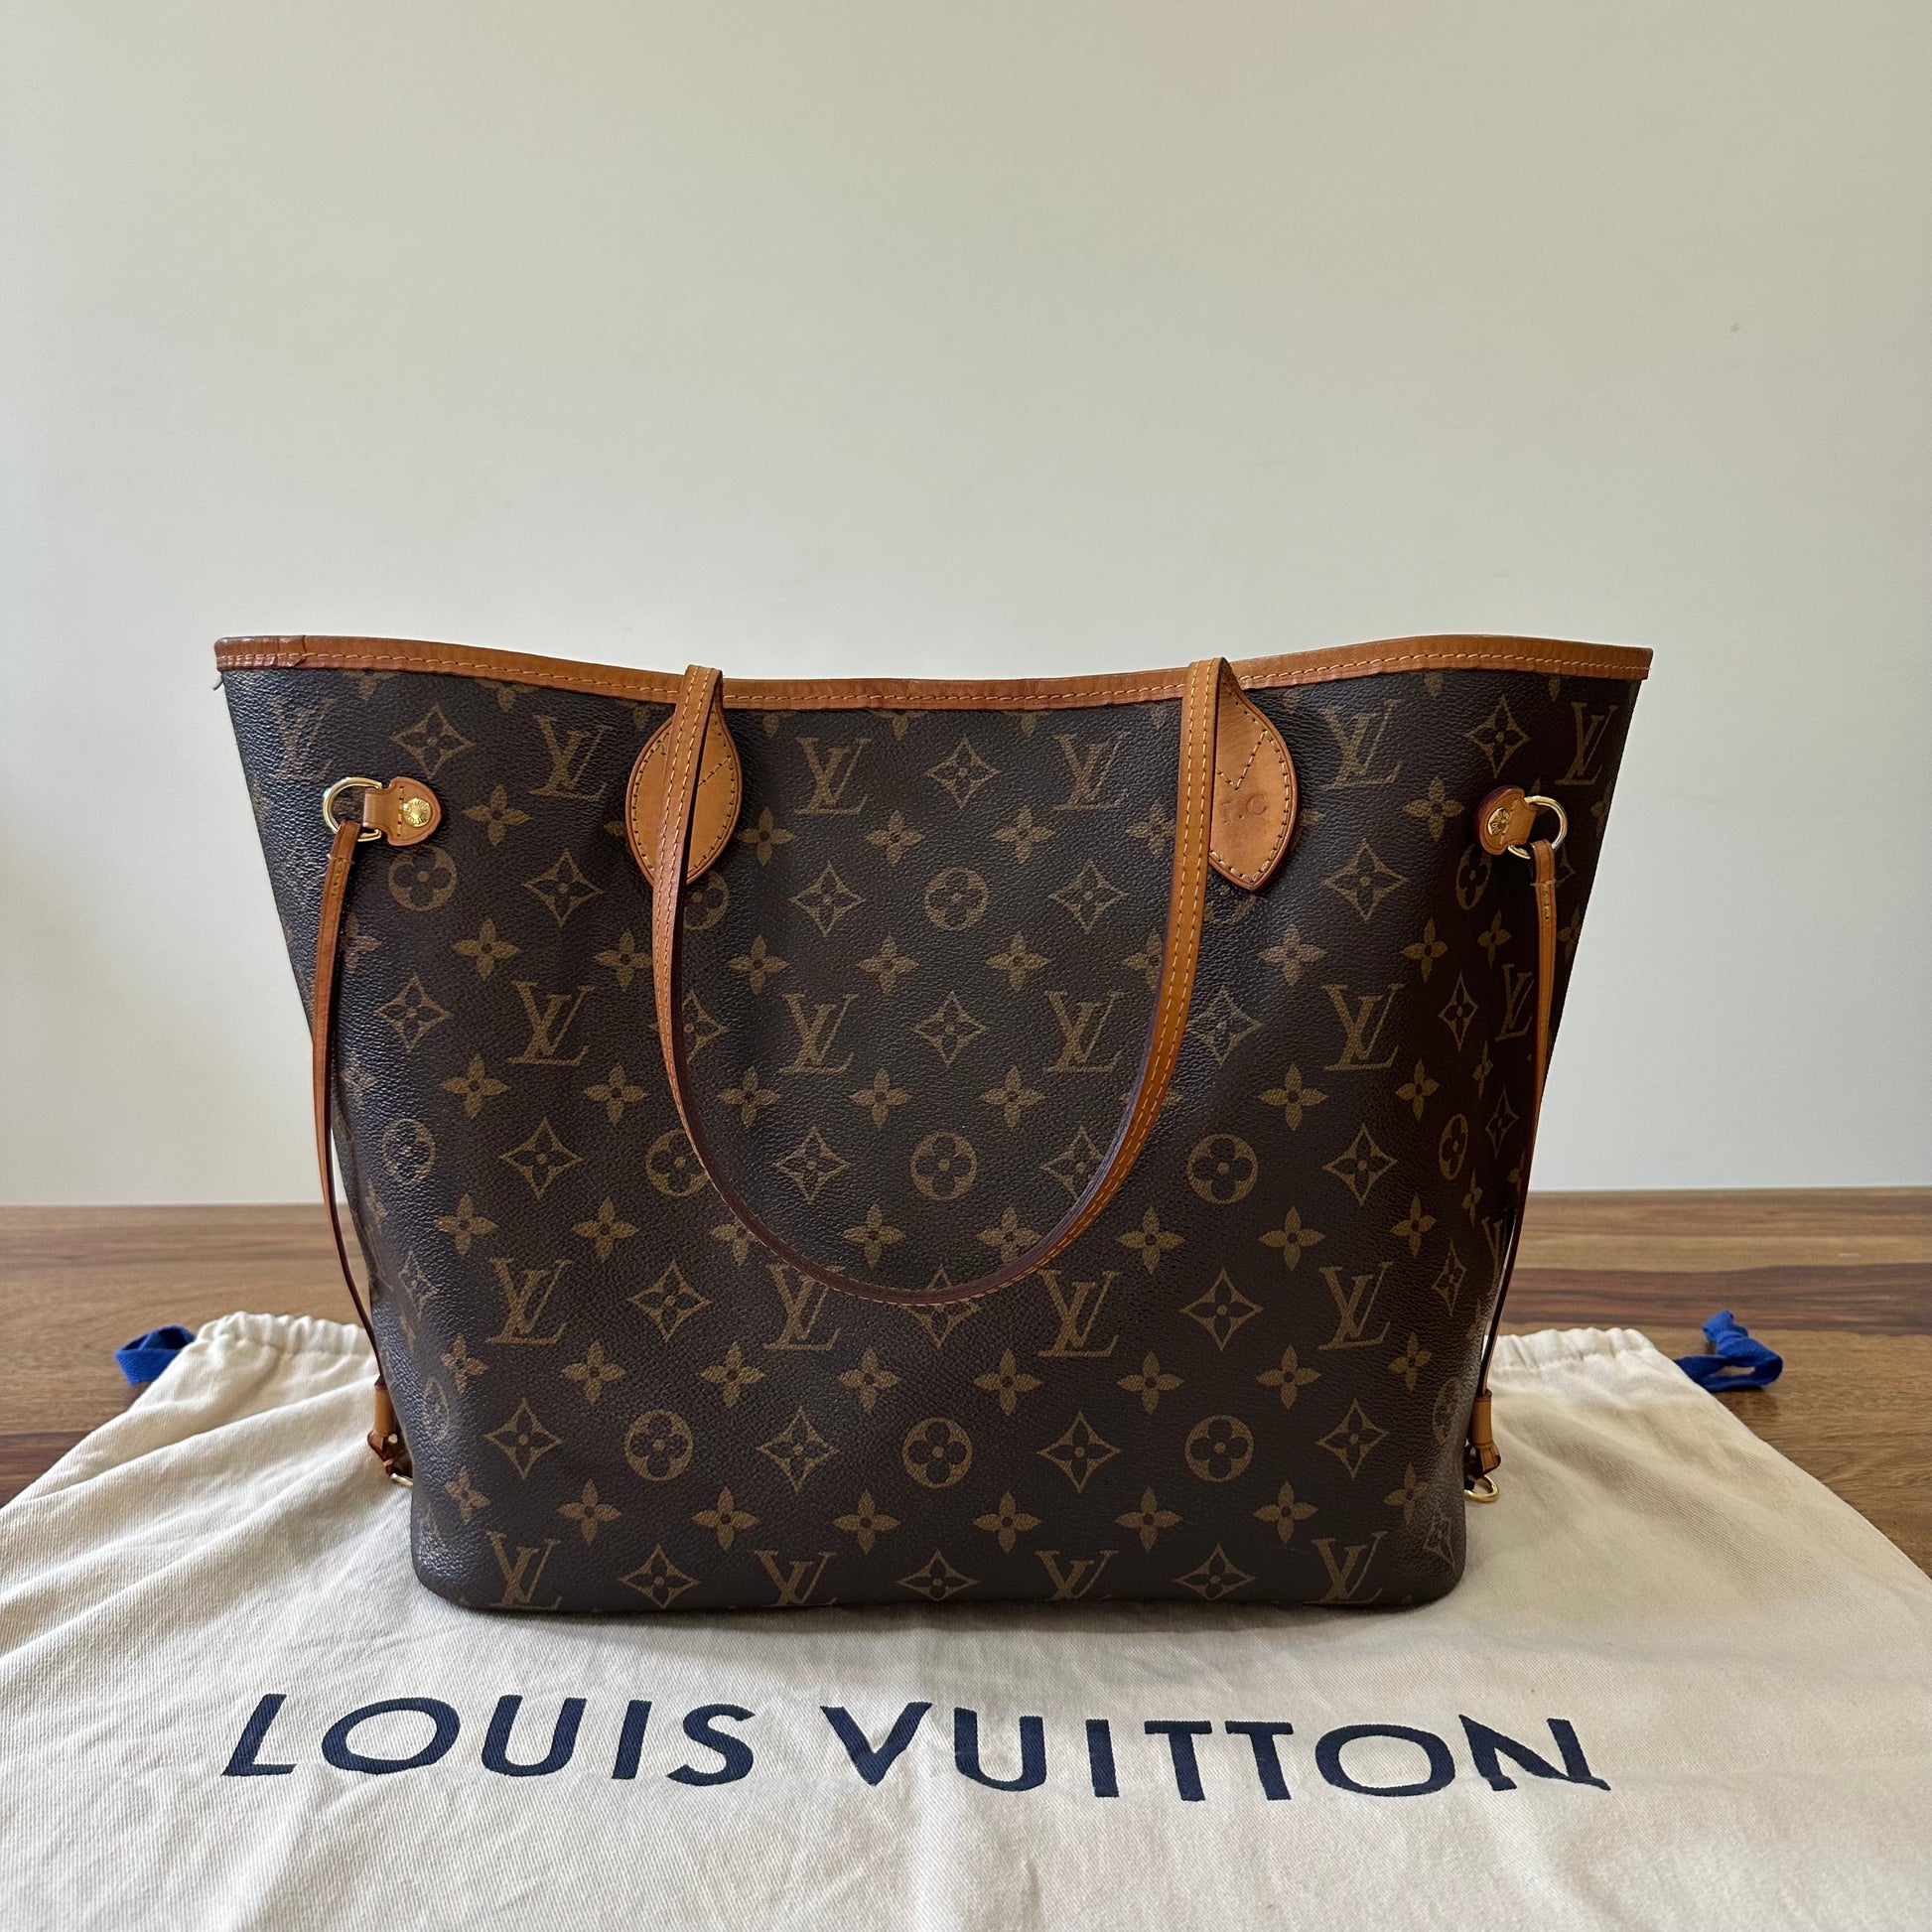 Louis Vuitton bags on sale in India